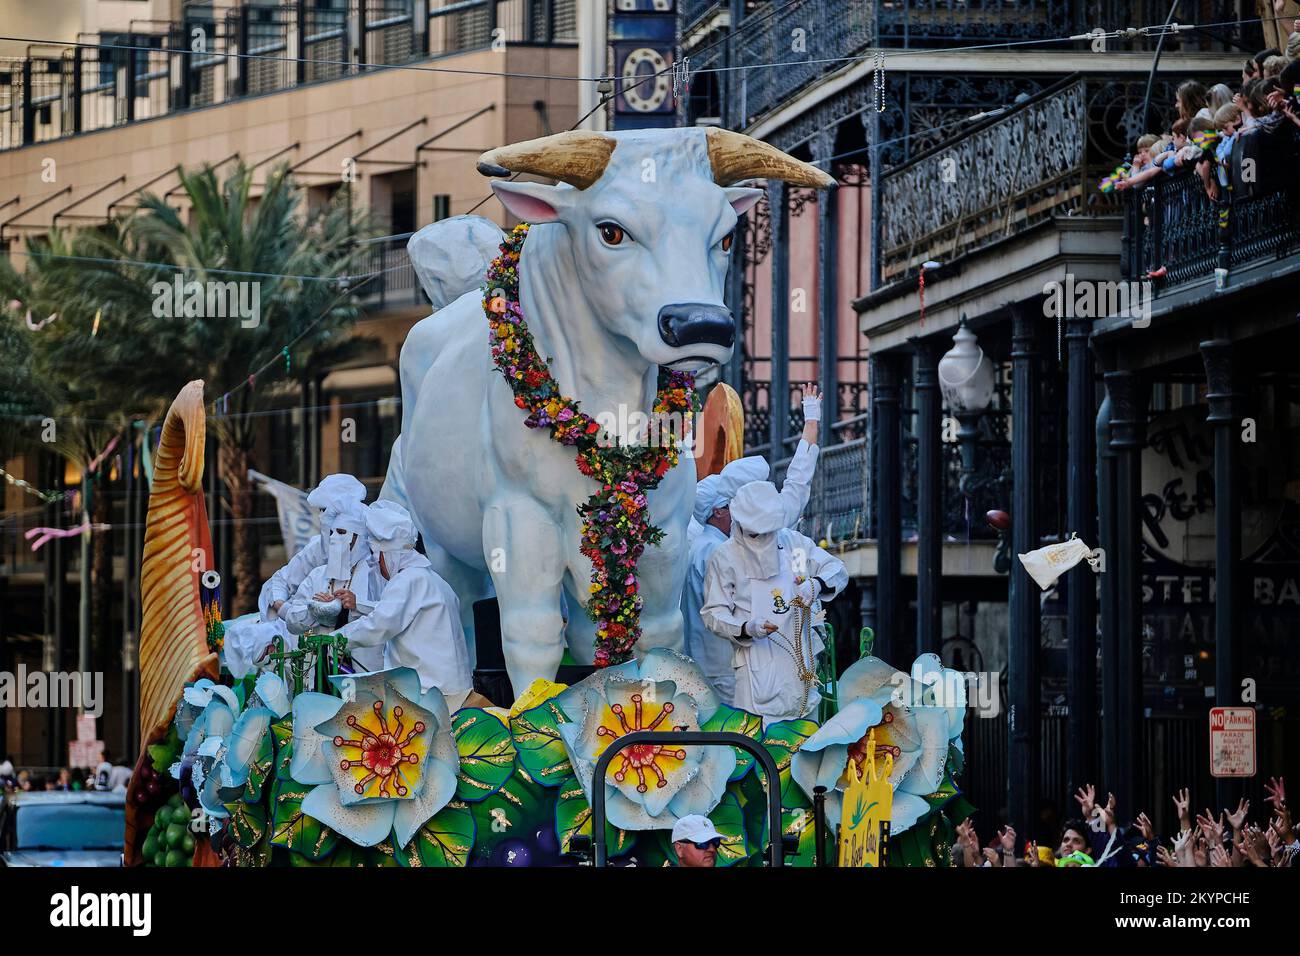 New Orleans, Louisiana, USA. 1st Mar, 2022. The Krewe of Rex parades during Fat Tuesday Mardi Gras celebrations in New Orleans, Louisiana USA on March 01, 2022. Mardi Gras parades and festivities were cancelled in the city last year due to the Covid-19 pandemic. (Credit Image: © Dan Anderson/ZUMA Press Wire) Stock Photo